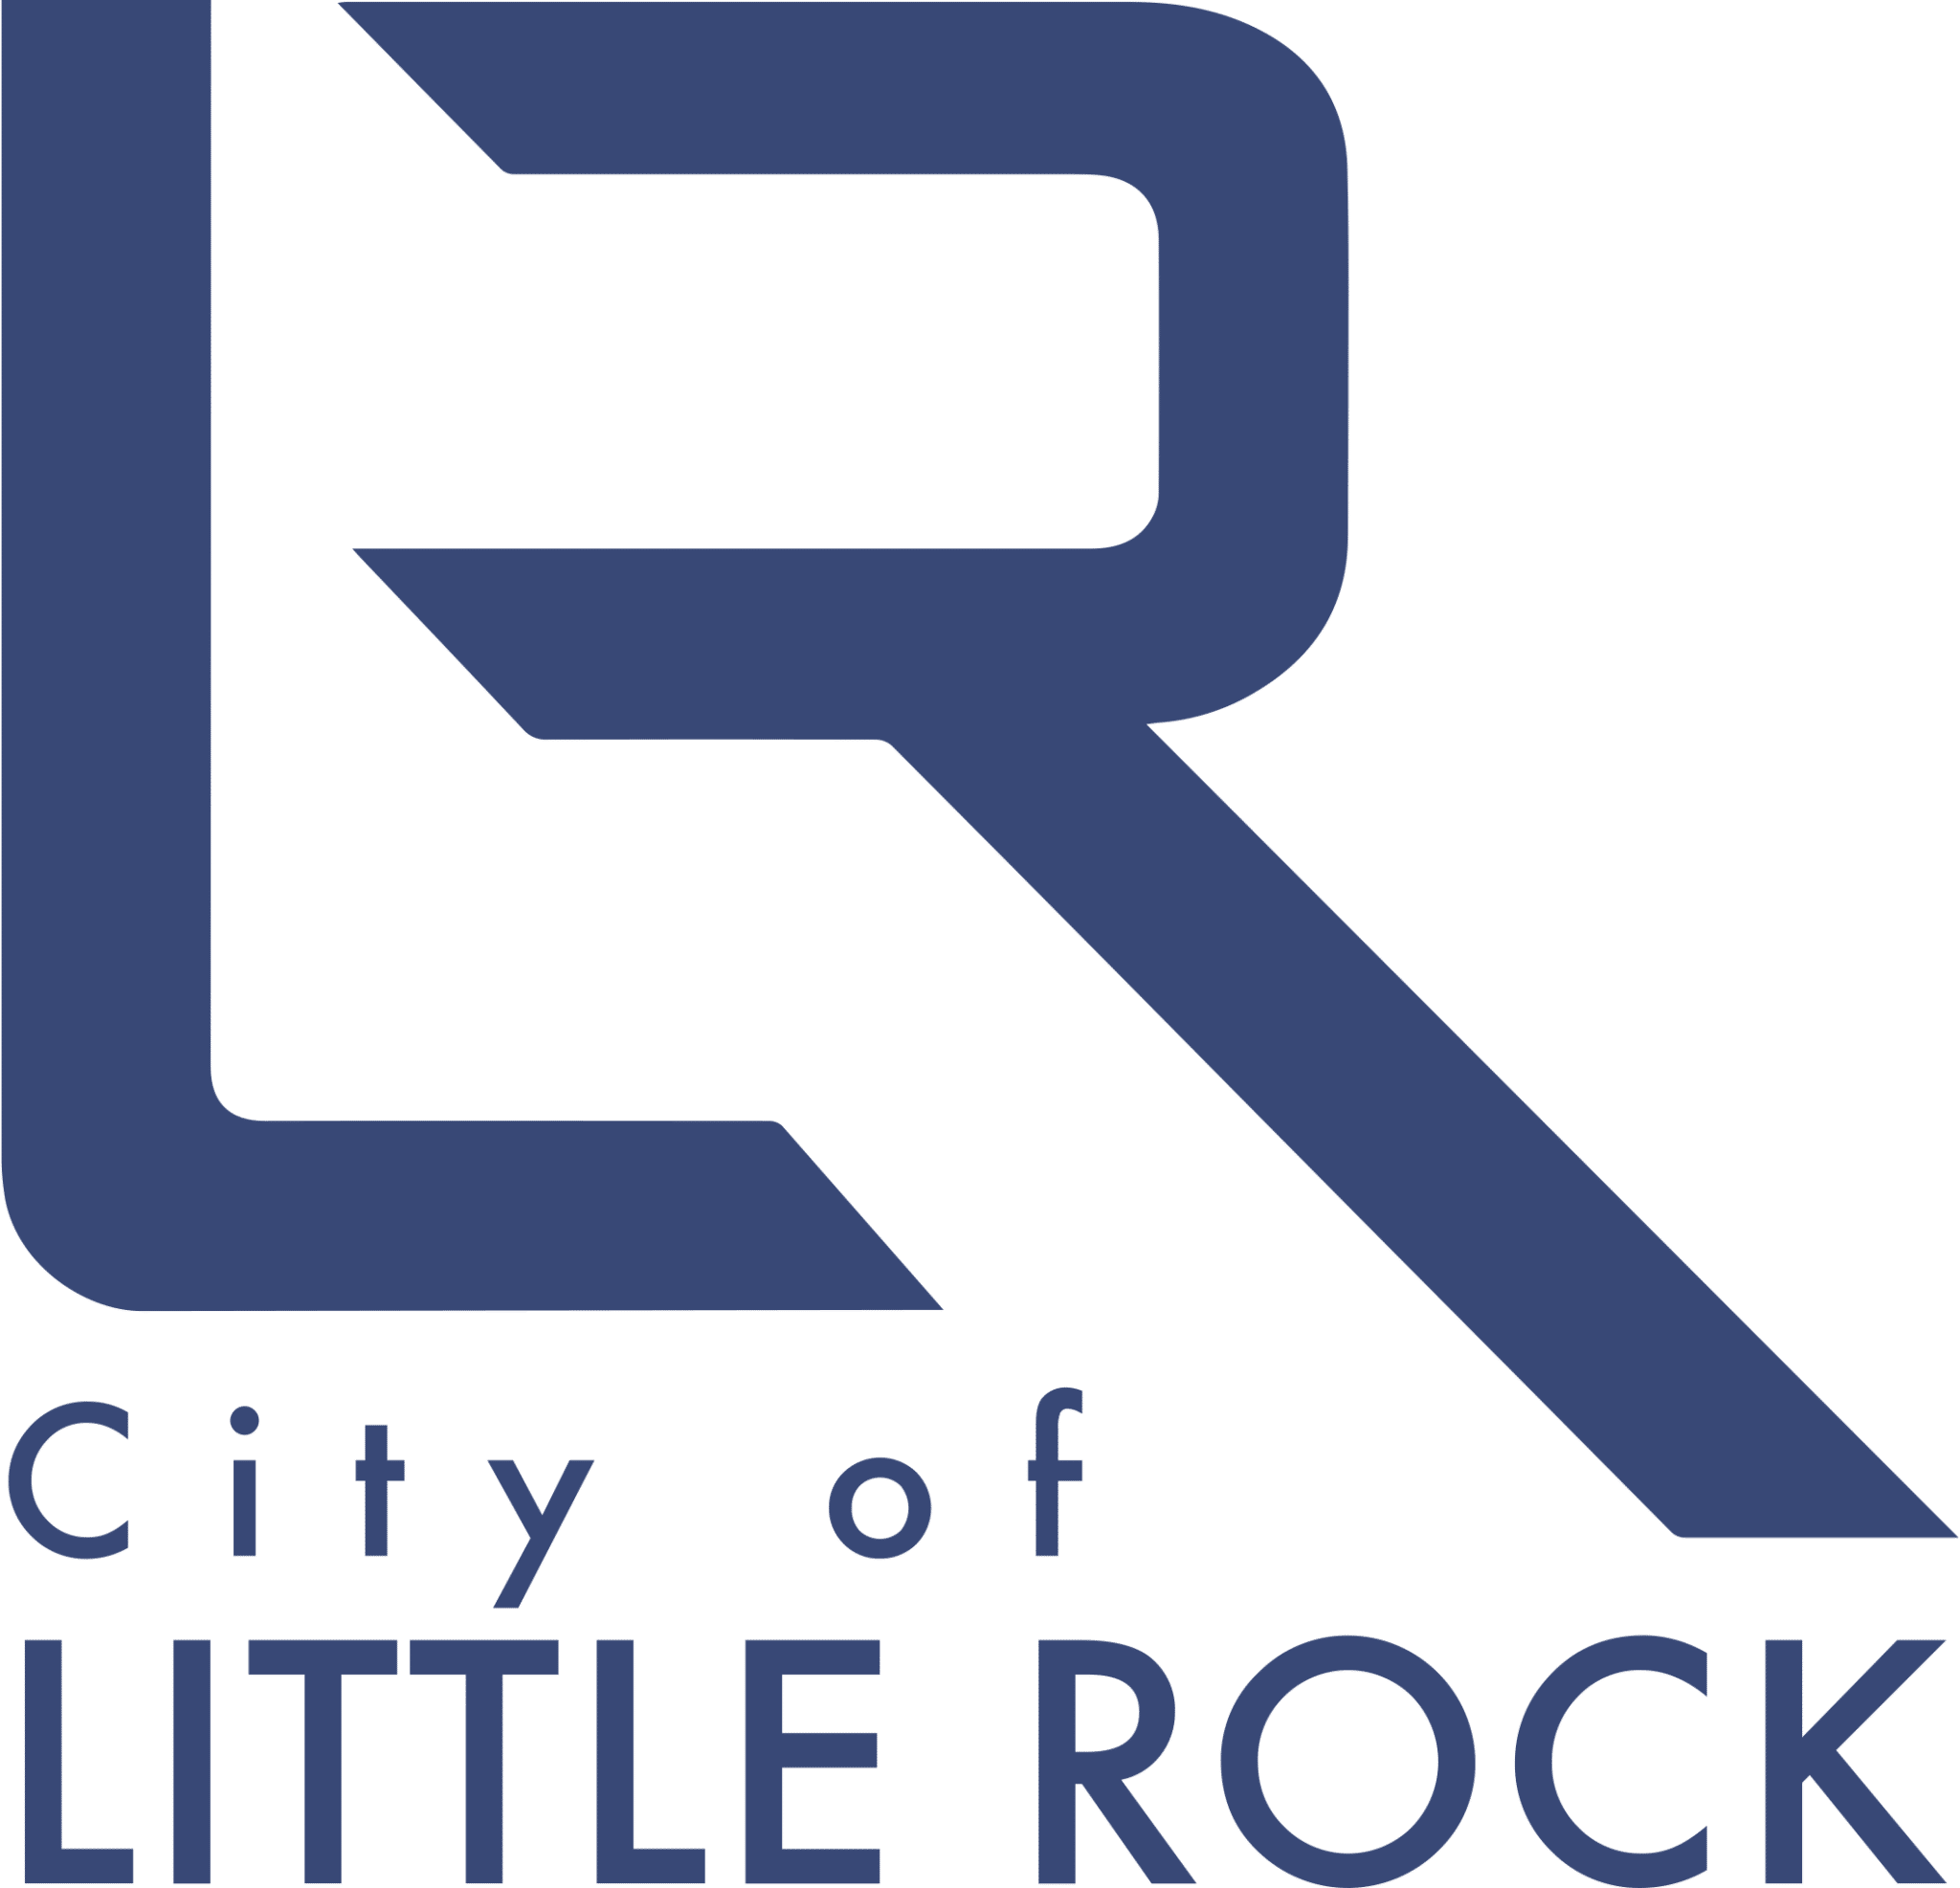 City of Little Rock logo: A large navy LR forming what looks like one giant R.